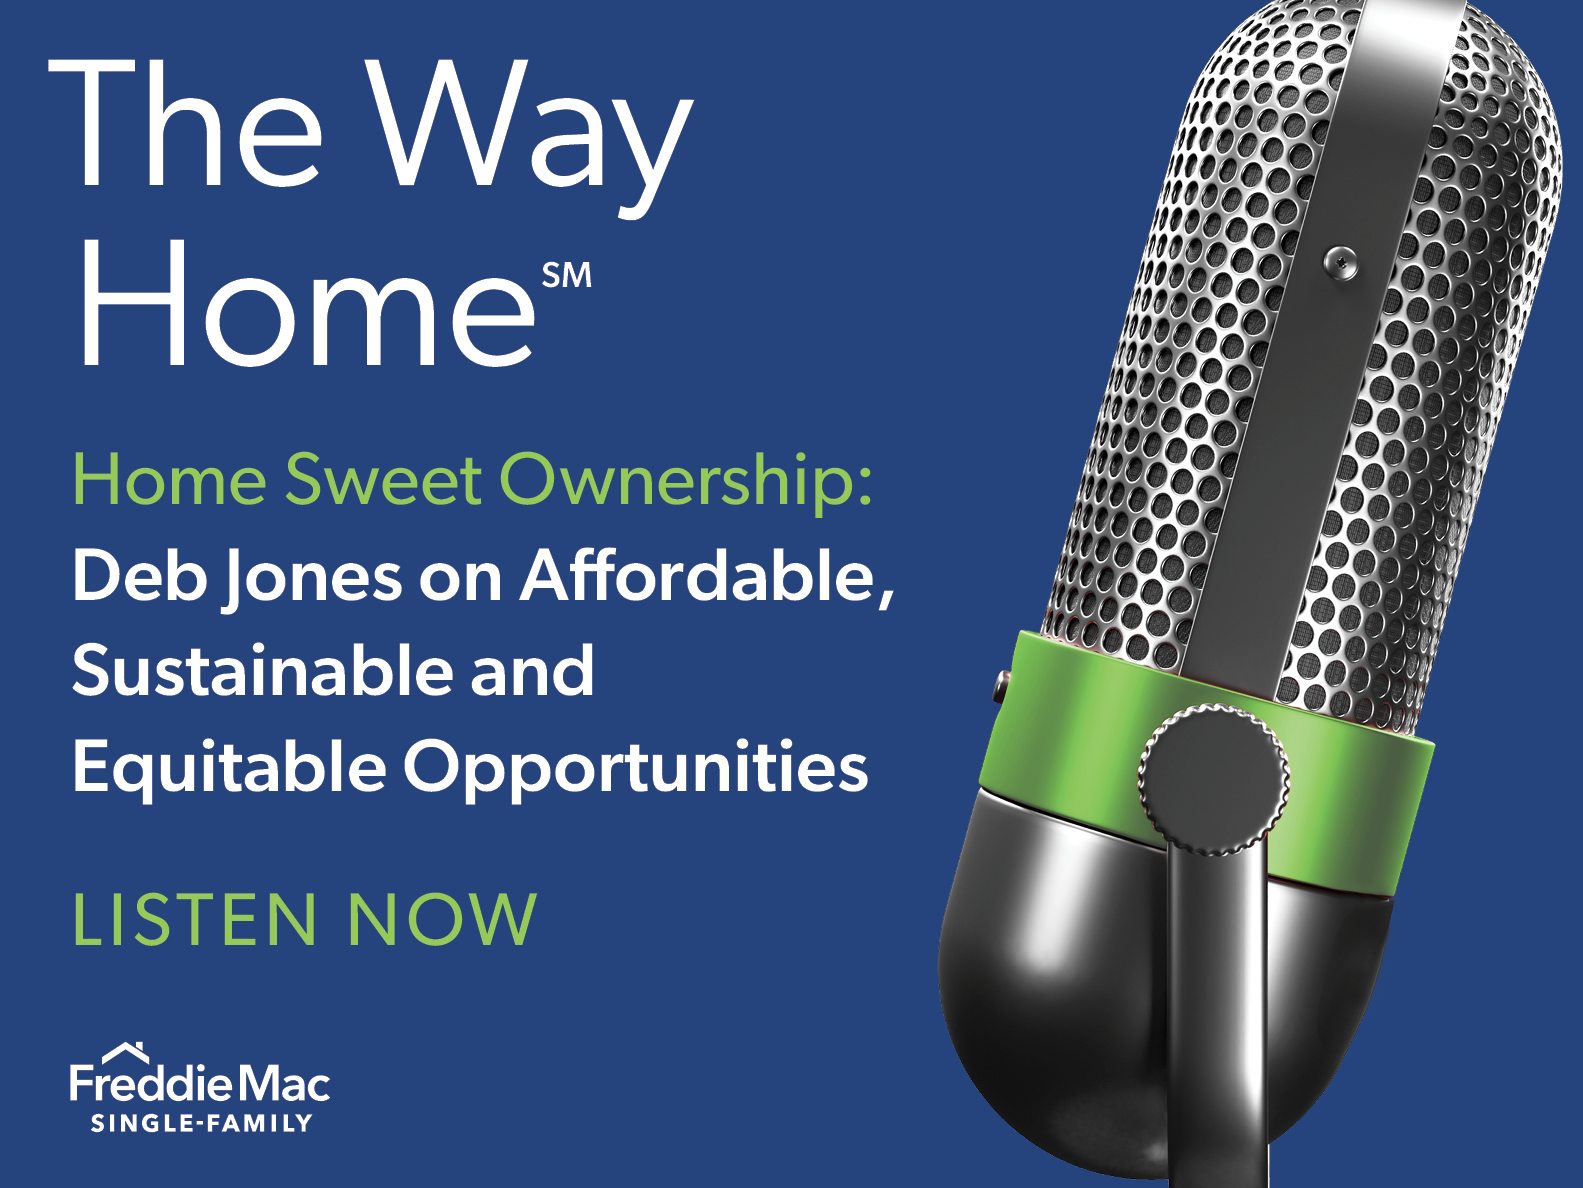 The Way Home podcast with Deb Jones